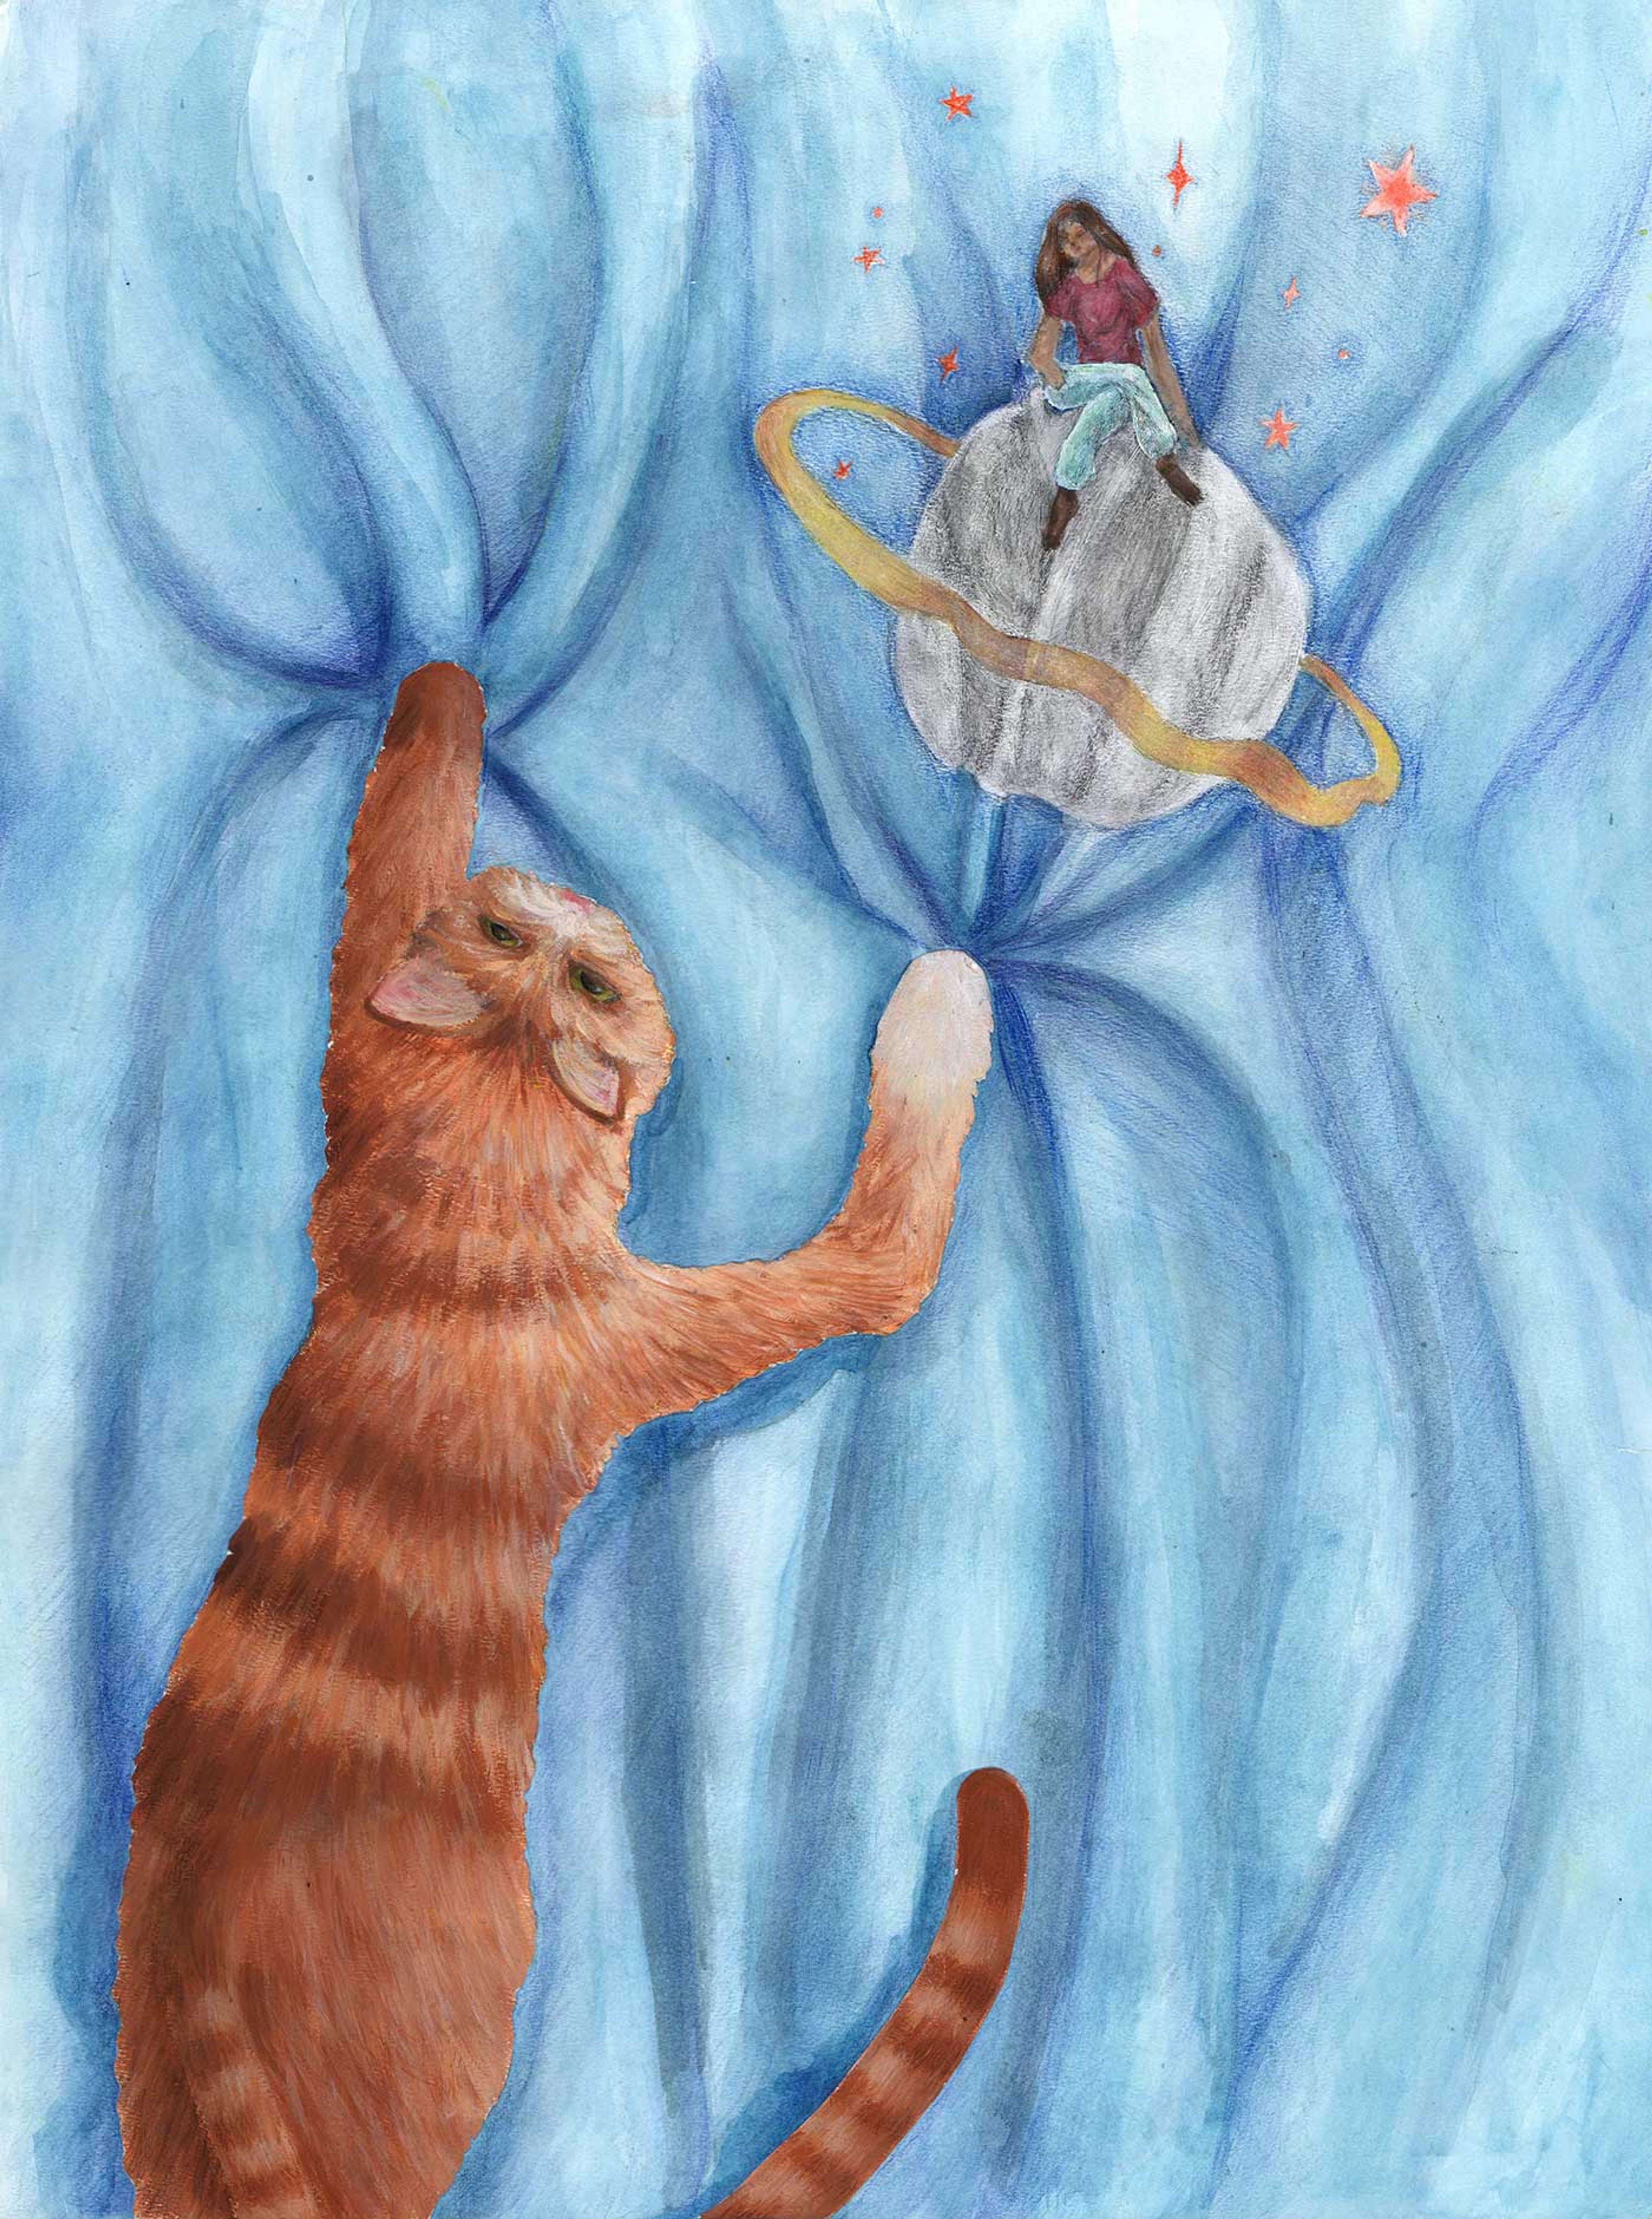 Painting of an orange cat lying on a bed reaching its paws towards an image of a girl sitting on a planet.